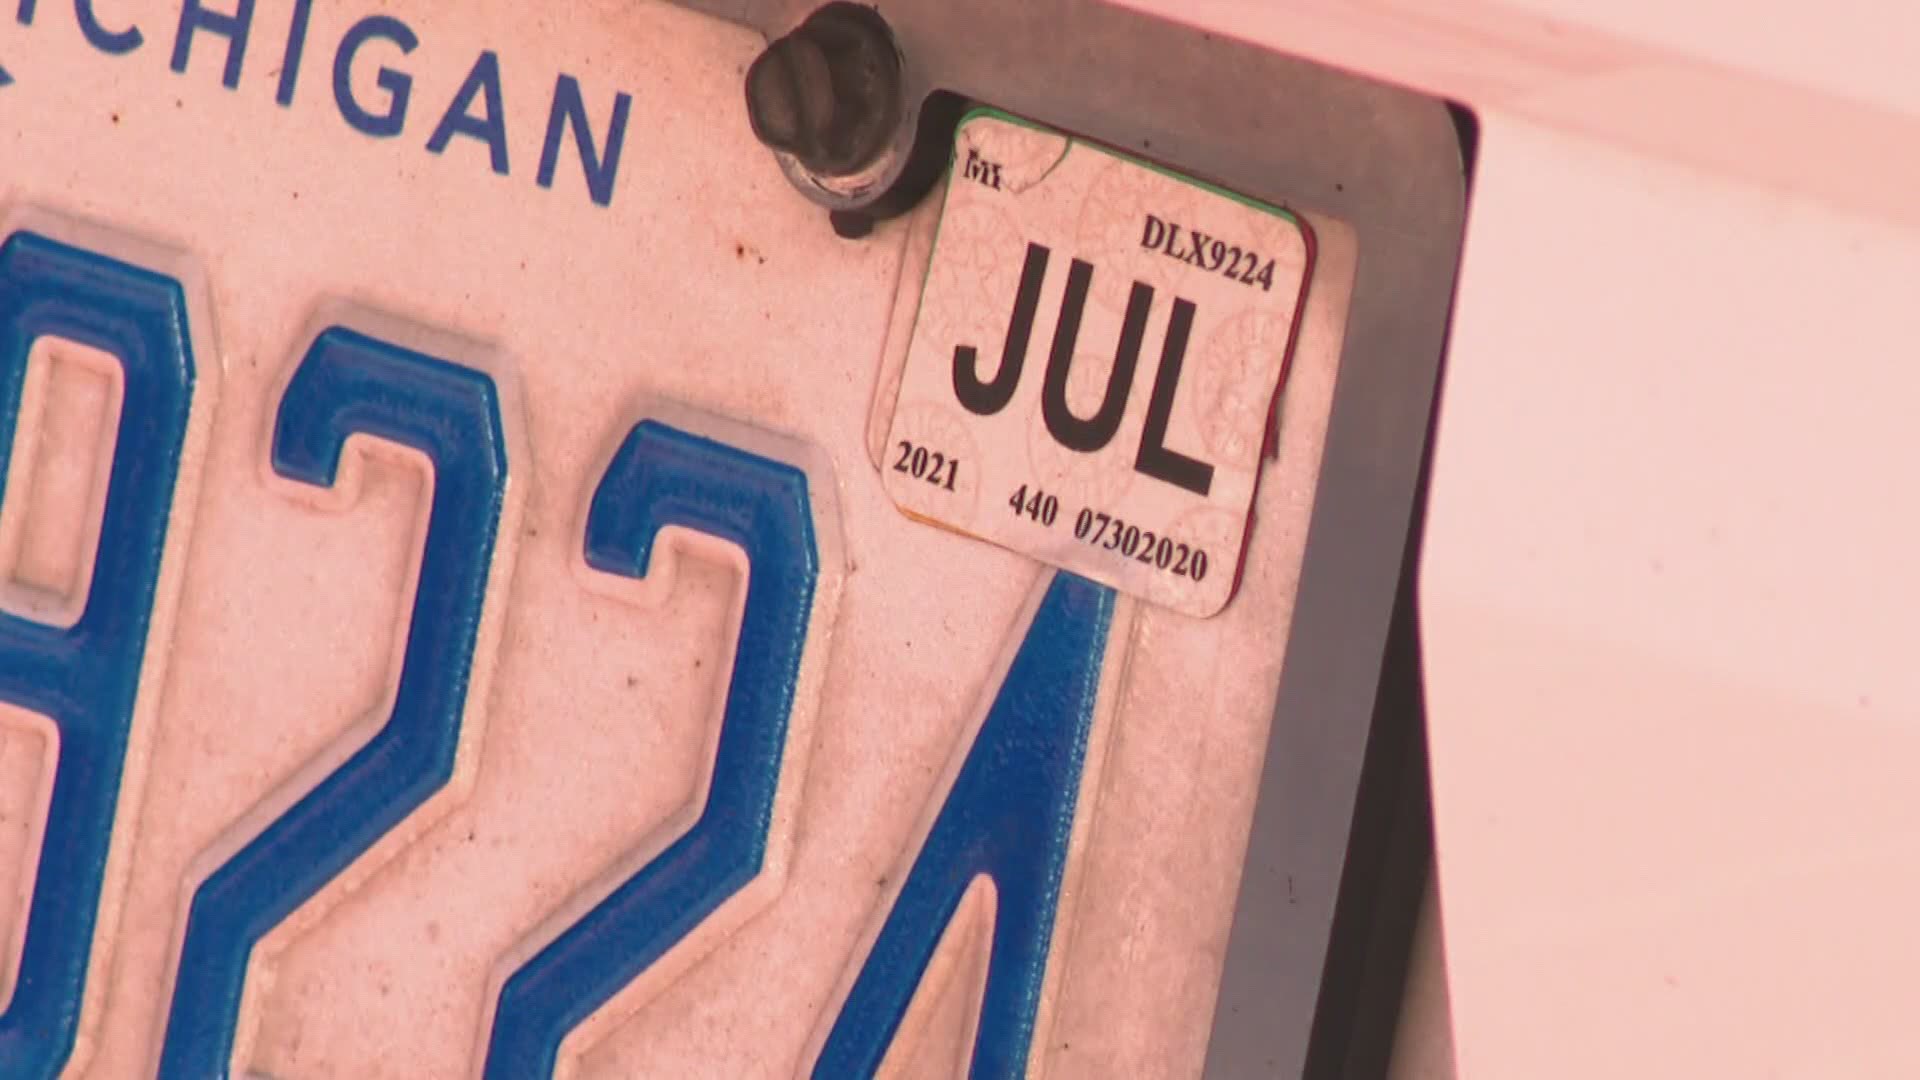 michigan-to-offer-2-year-license-plate-tabs-in-october-2022-wzzm13